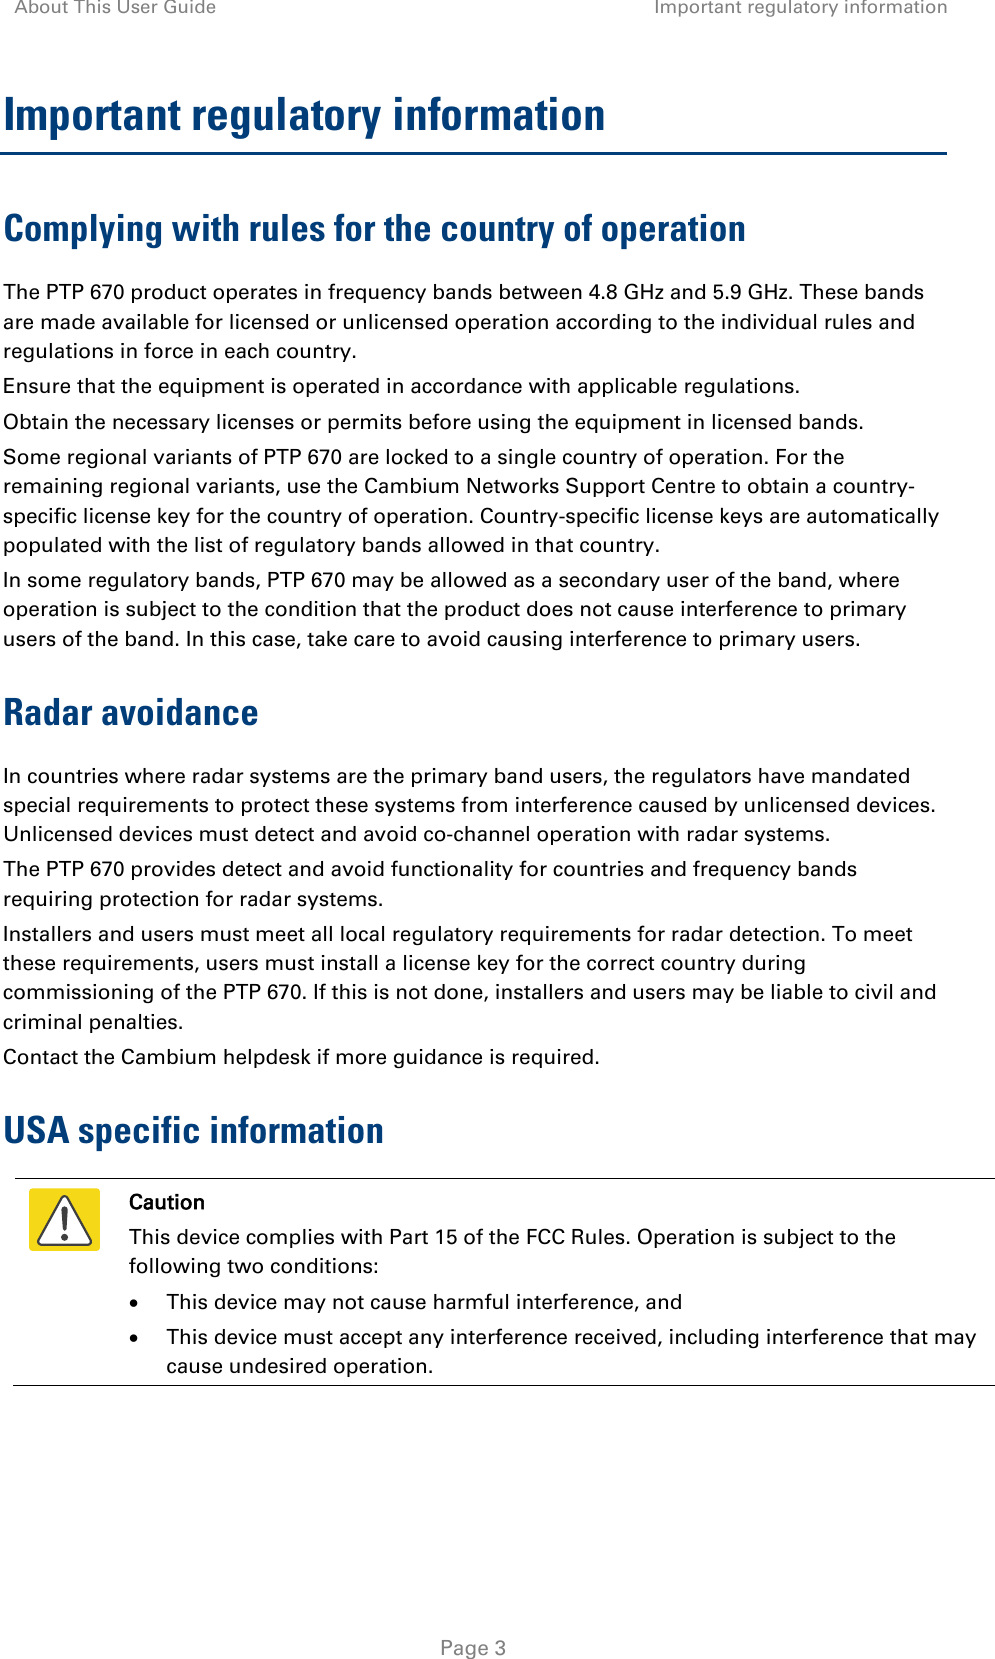 About This User Guide Important regulatory information   Page 3 Important regulatory information Complying with rules for the country of operation The PTP 670 product operates in frequency bands between 4.8 GHz and 5.9 GHz. These bands are made available for licensed or unlicensed operation according to the individual rules and regulations in force in each country. Ensure that the equipment is operated in accordance with applicable regulations. Obtain the necessary licenses or permits before using the equipment in licensed bands. Some regional variants of PTP 670 are locked to a single country of operation. For the remaining regional variants, use the Cambium Networks Support Centre to obtain a country-specific license key for the country of operation. Country-specific license keys are automatically populated with the list of regulatory bands allowed in that country. In some regulatory bands, PTP 670 may be allowed as a secondary user of the band, where operation is subject to the condition that the product does not cause interference to primary users of the band. In this case, take care to avoid causing interference to primary users. Radar avoidance In countries where radar systems are the primary band users, the regulators have mandated special requirements to protect these systems from interference caused by unlicensed devices. Unlicensed devices must detect and avoid co-channel operation with radar systems.  The PTP 670 provides detect and avoid functionality for countries and frequency bands requiring protection for radar systems. Installers and users must meet all local regulatory requirements for radar detection. To meet these requirements, users must install a license key for the correct country during commissioning of the PTP 670. If this is not done, installers and users may be liable to civil and criminal penalties. Contact the Cambium helpdesk if more guidance is required. USA specific information  Caution This device complies with Part 15 of the FCC Rules. Operation is subject to the following two conditions: • This device may not cause harmful interference, and • This device must accept any interference received, including interference that may cause undesired operation.  